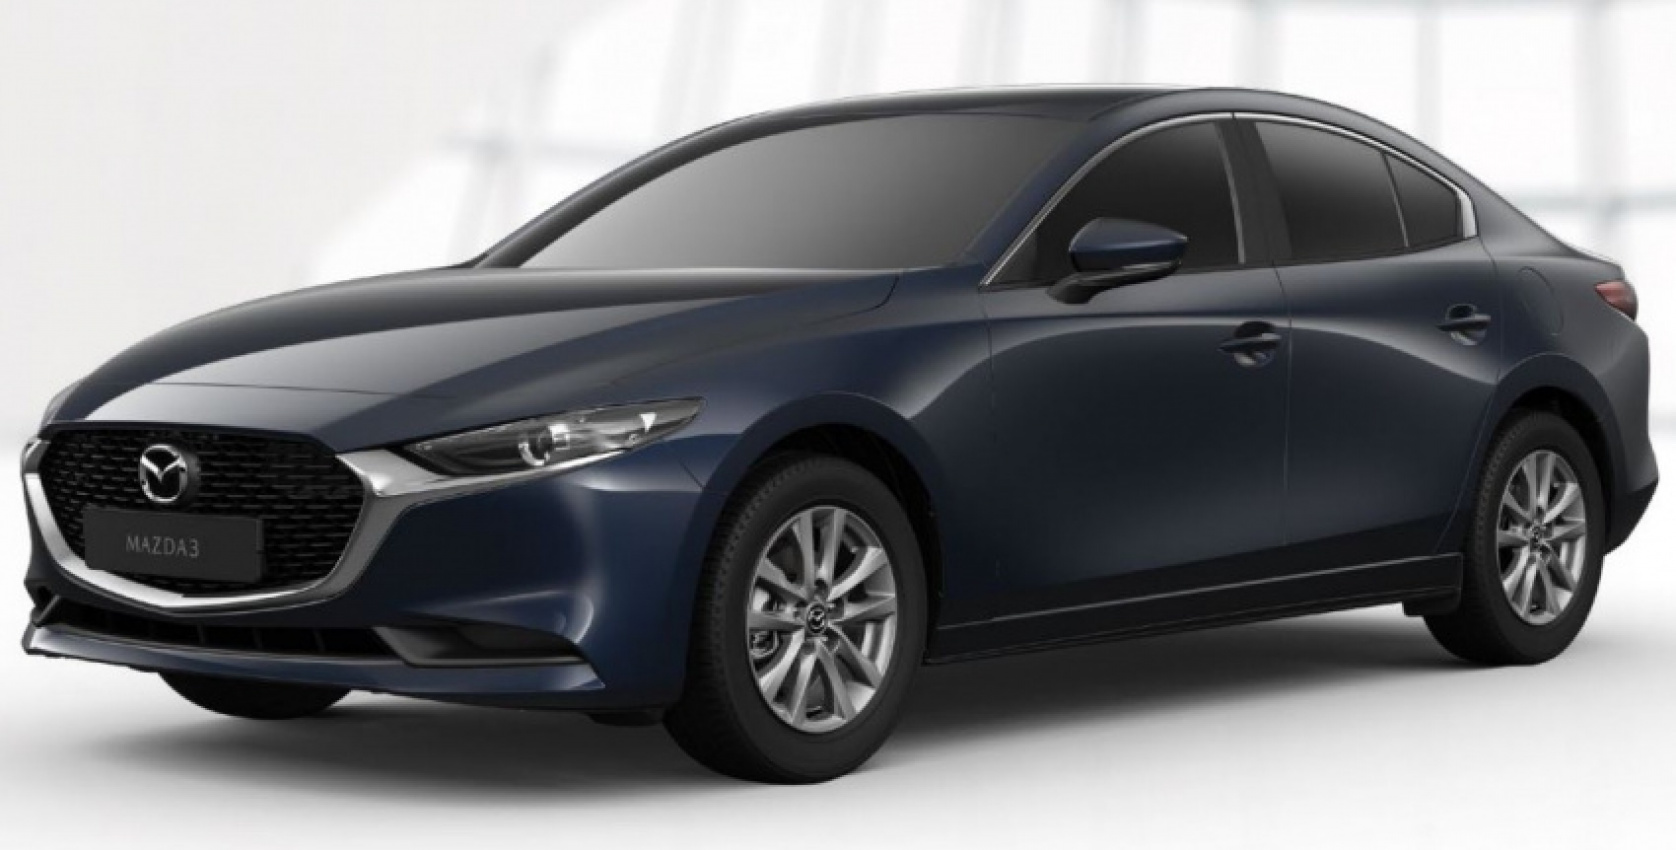 autos, cars, features, mazda, android, mazda 3, mazda 3 sedan, android, mazda 3 sedan getting cut – here’s what you can buy today